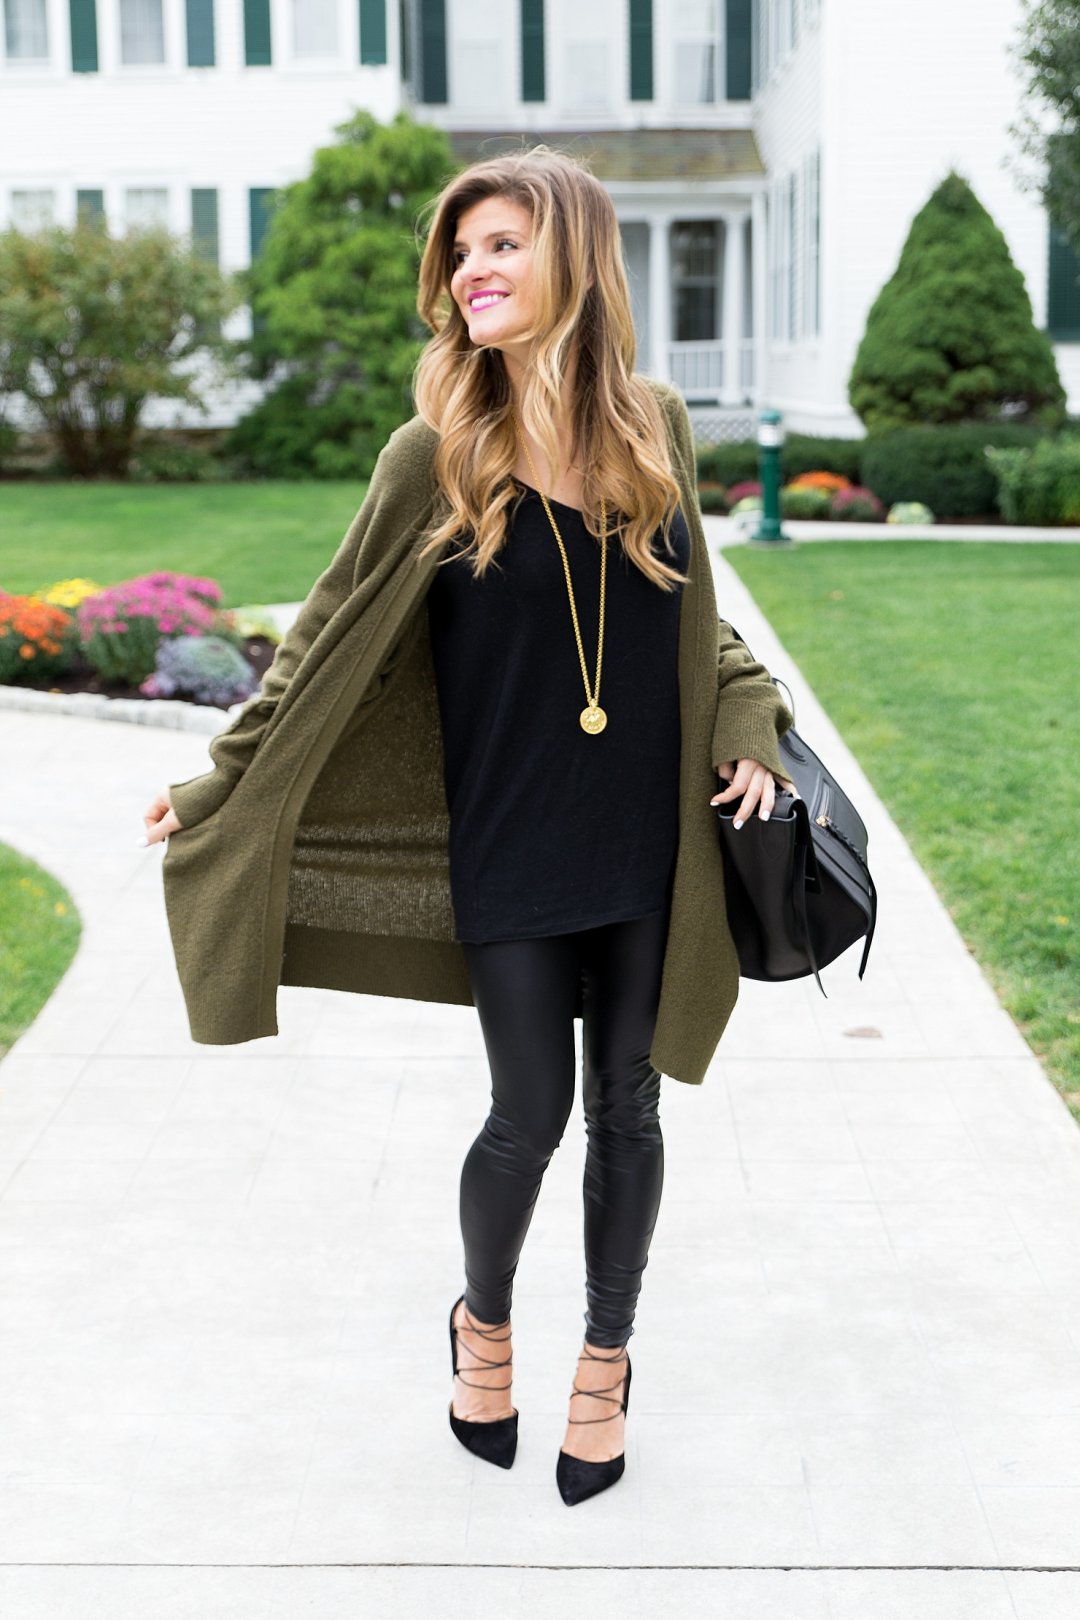 all black outfit idea, wearing all black with a long olive cardigan, liquid leather leggings winter outfit, black on black outfit, going out winter outfit, winter date night outfit, celine phantom tote, sam edelman strappy heels, winter all black outfit